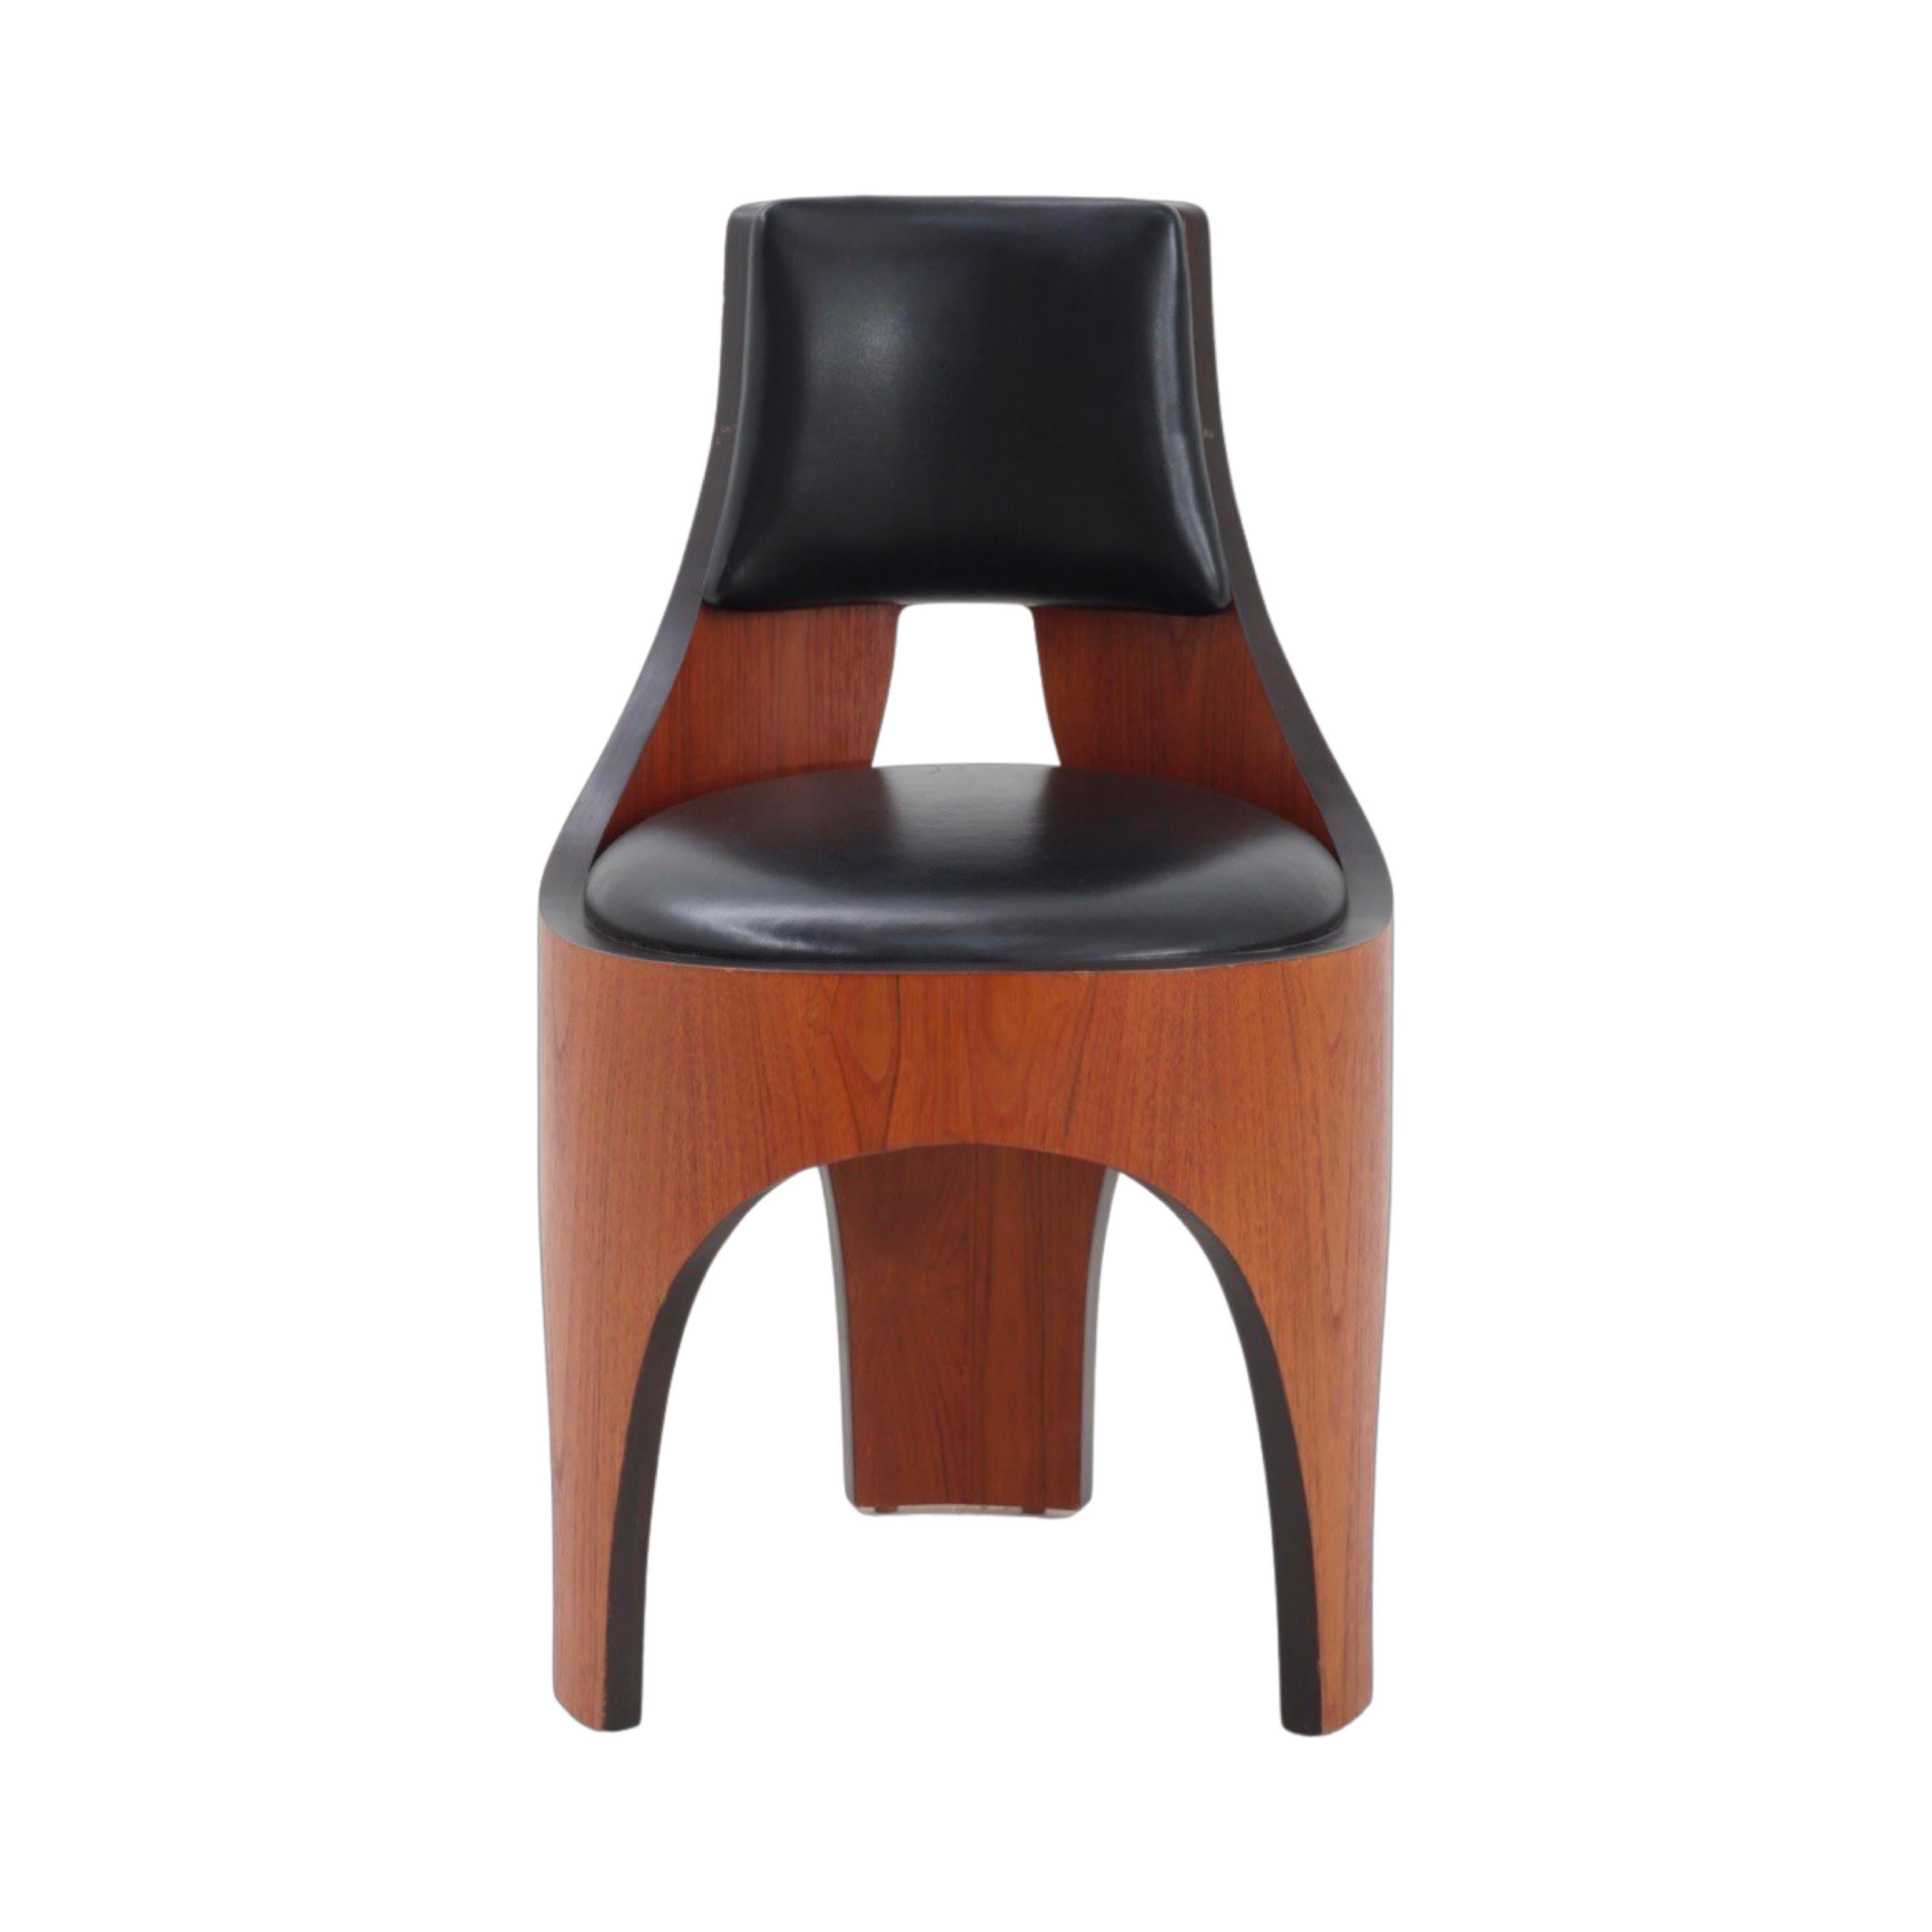 Veneer Set of 4 Cylindra Chairs by Henry P. Glass, 1966 For Sale